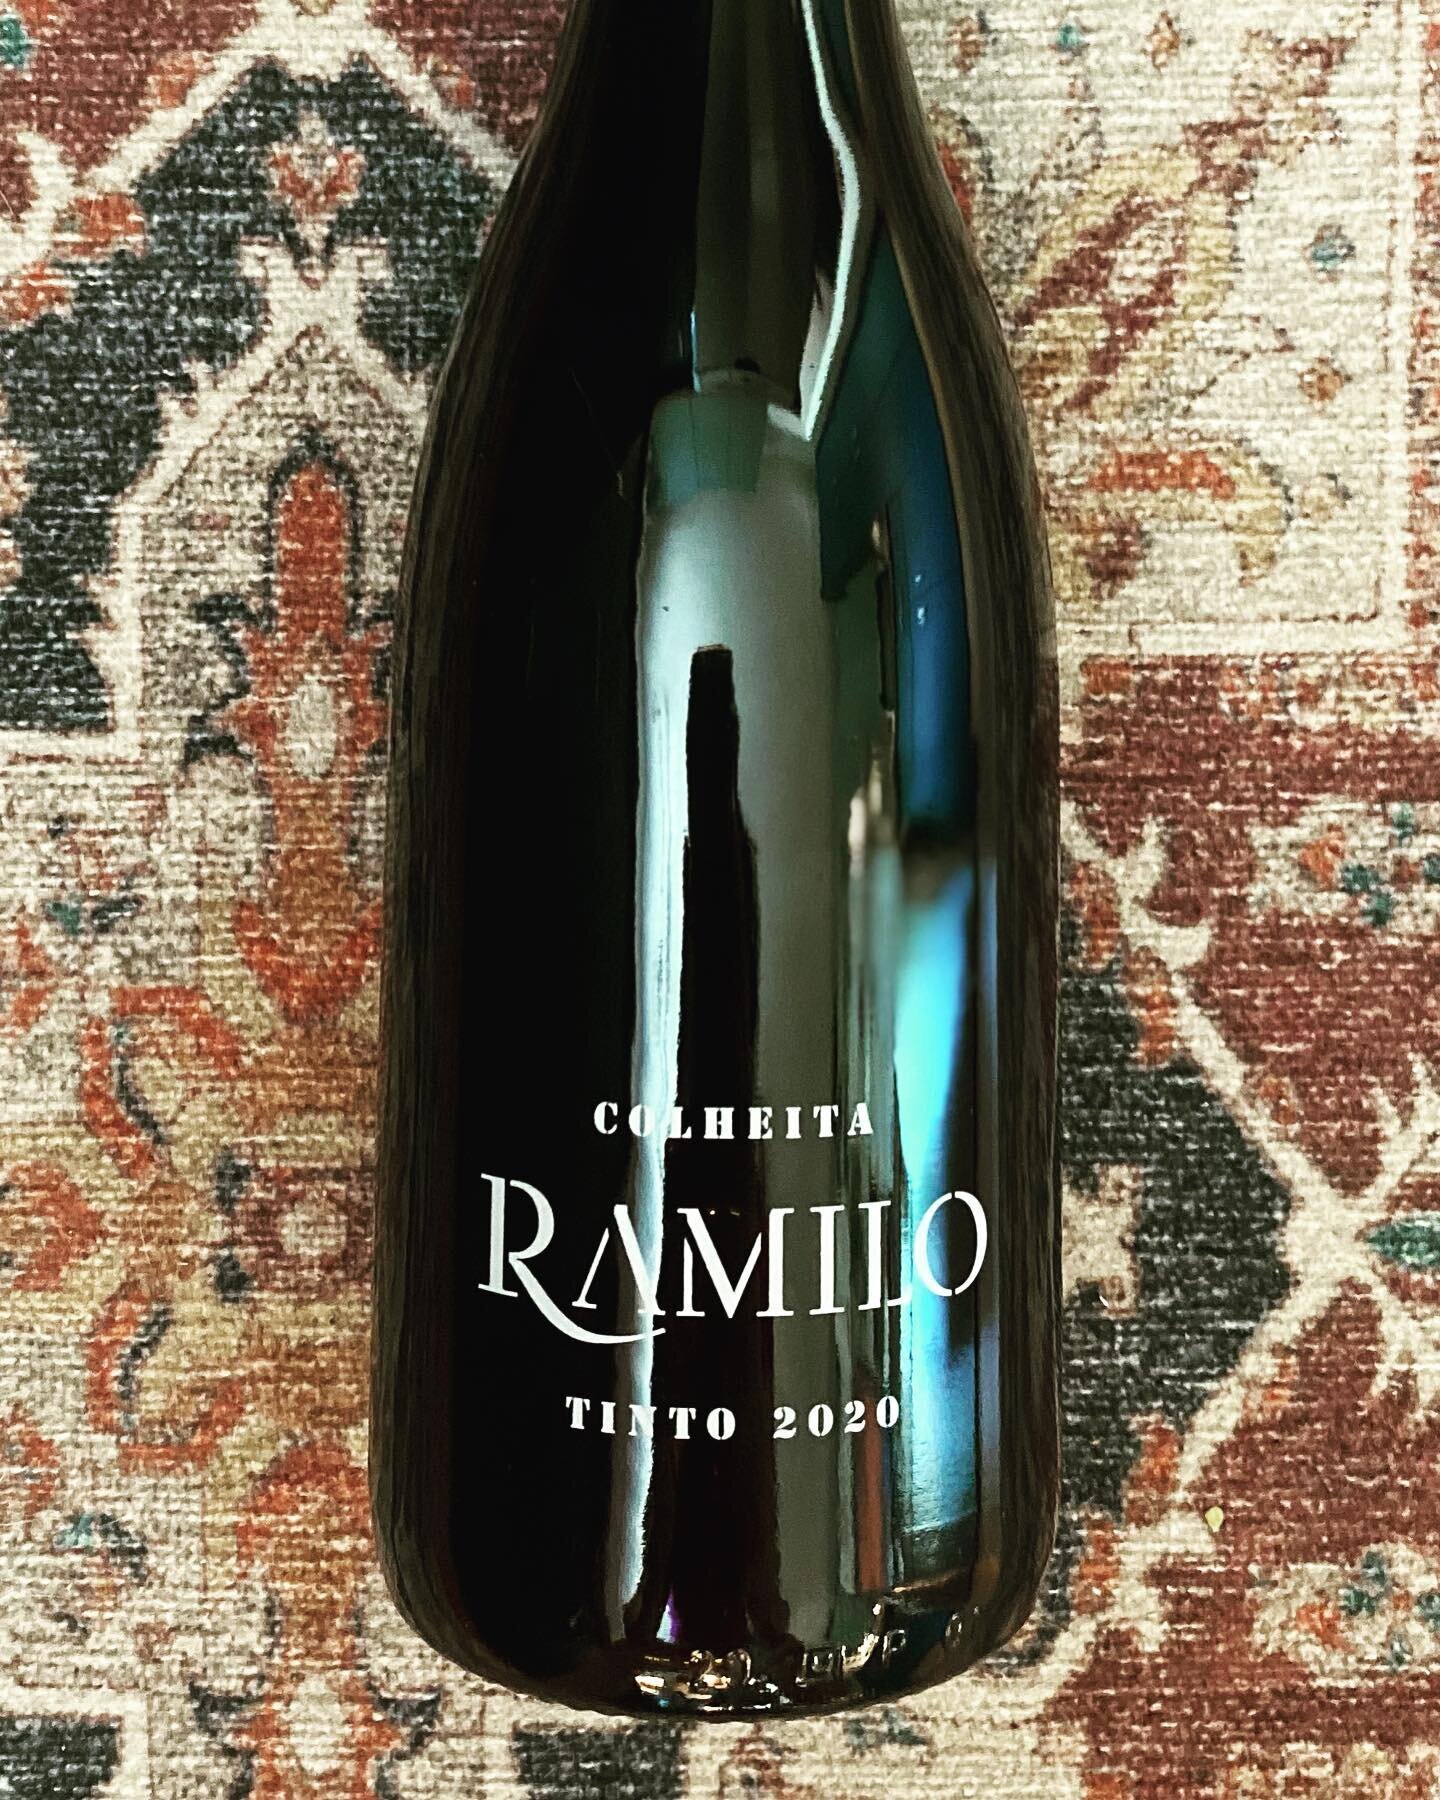 It&rsquo;s back&hellip;&amp; shinier than ever. @ramilowines 

#portugal #wine #lisbon #lisboa #askyourretailer #sustainable #shopsmall #shoplocal #winesofportugal #drinkportugal #instawine #instagood #happy #portugalday #redwine #anyseason #fathersd